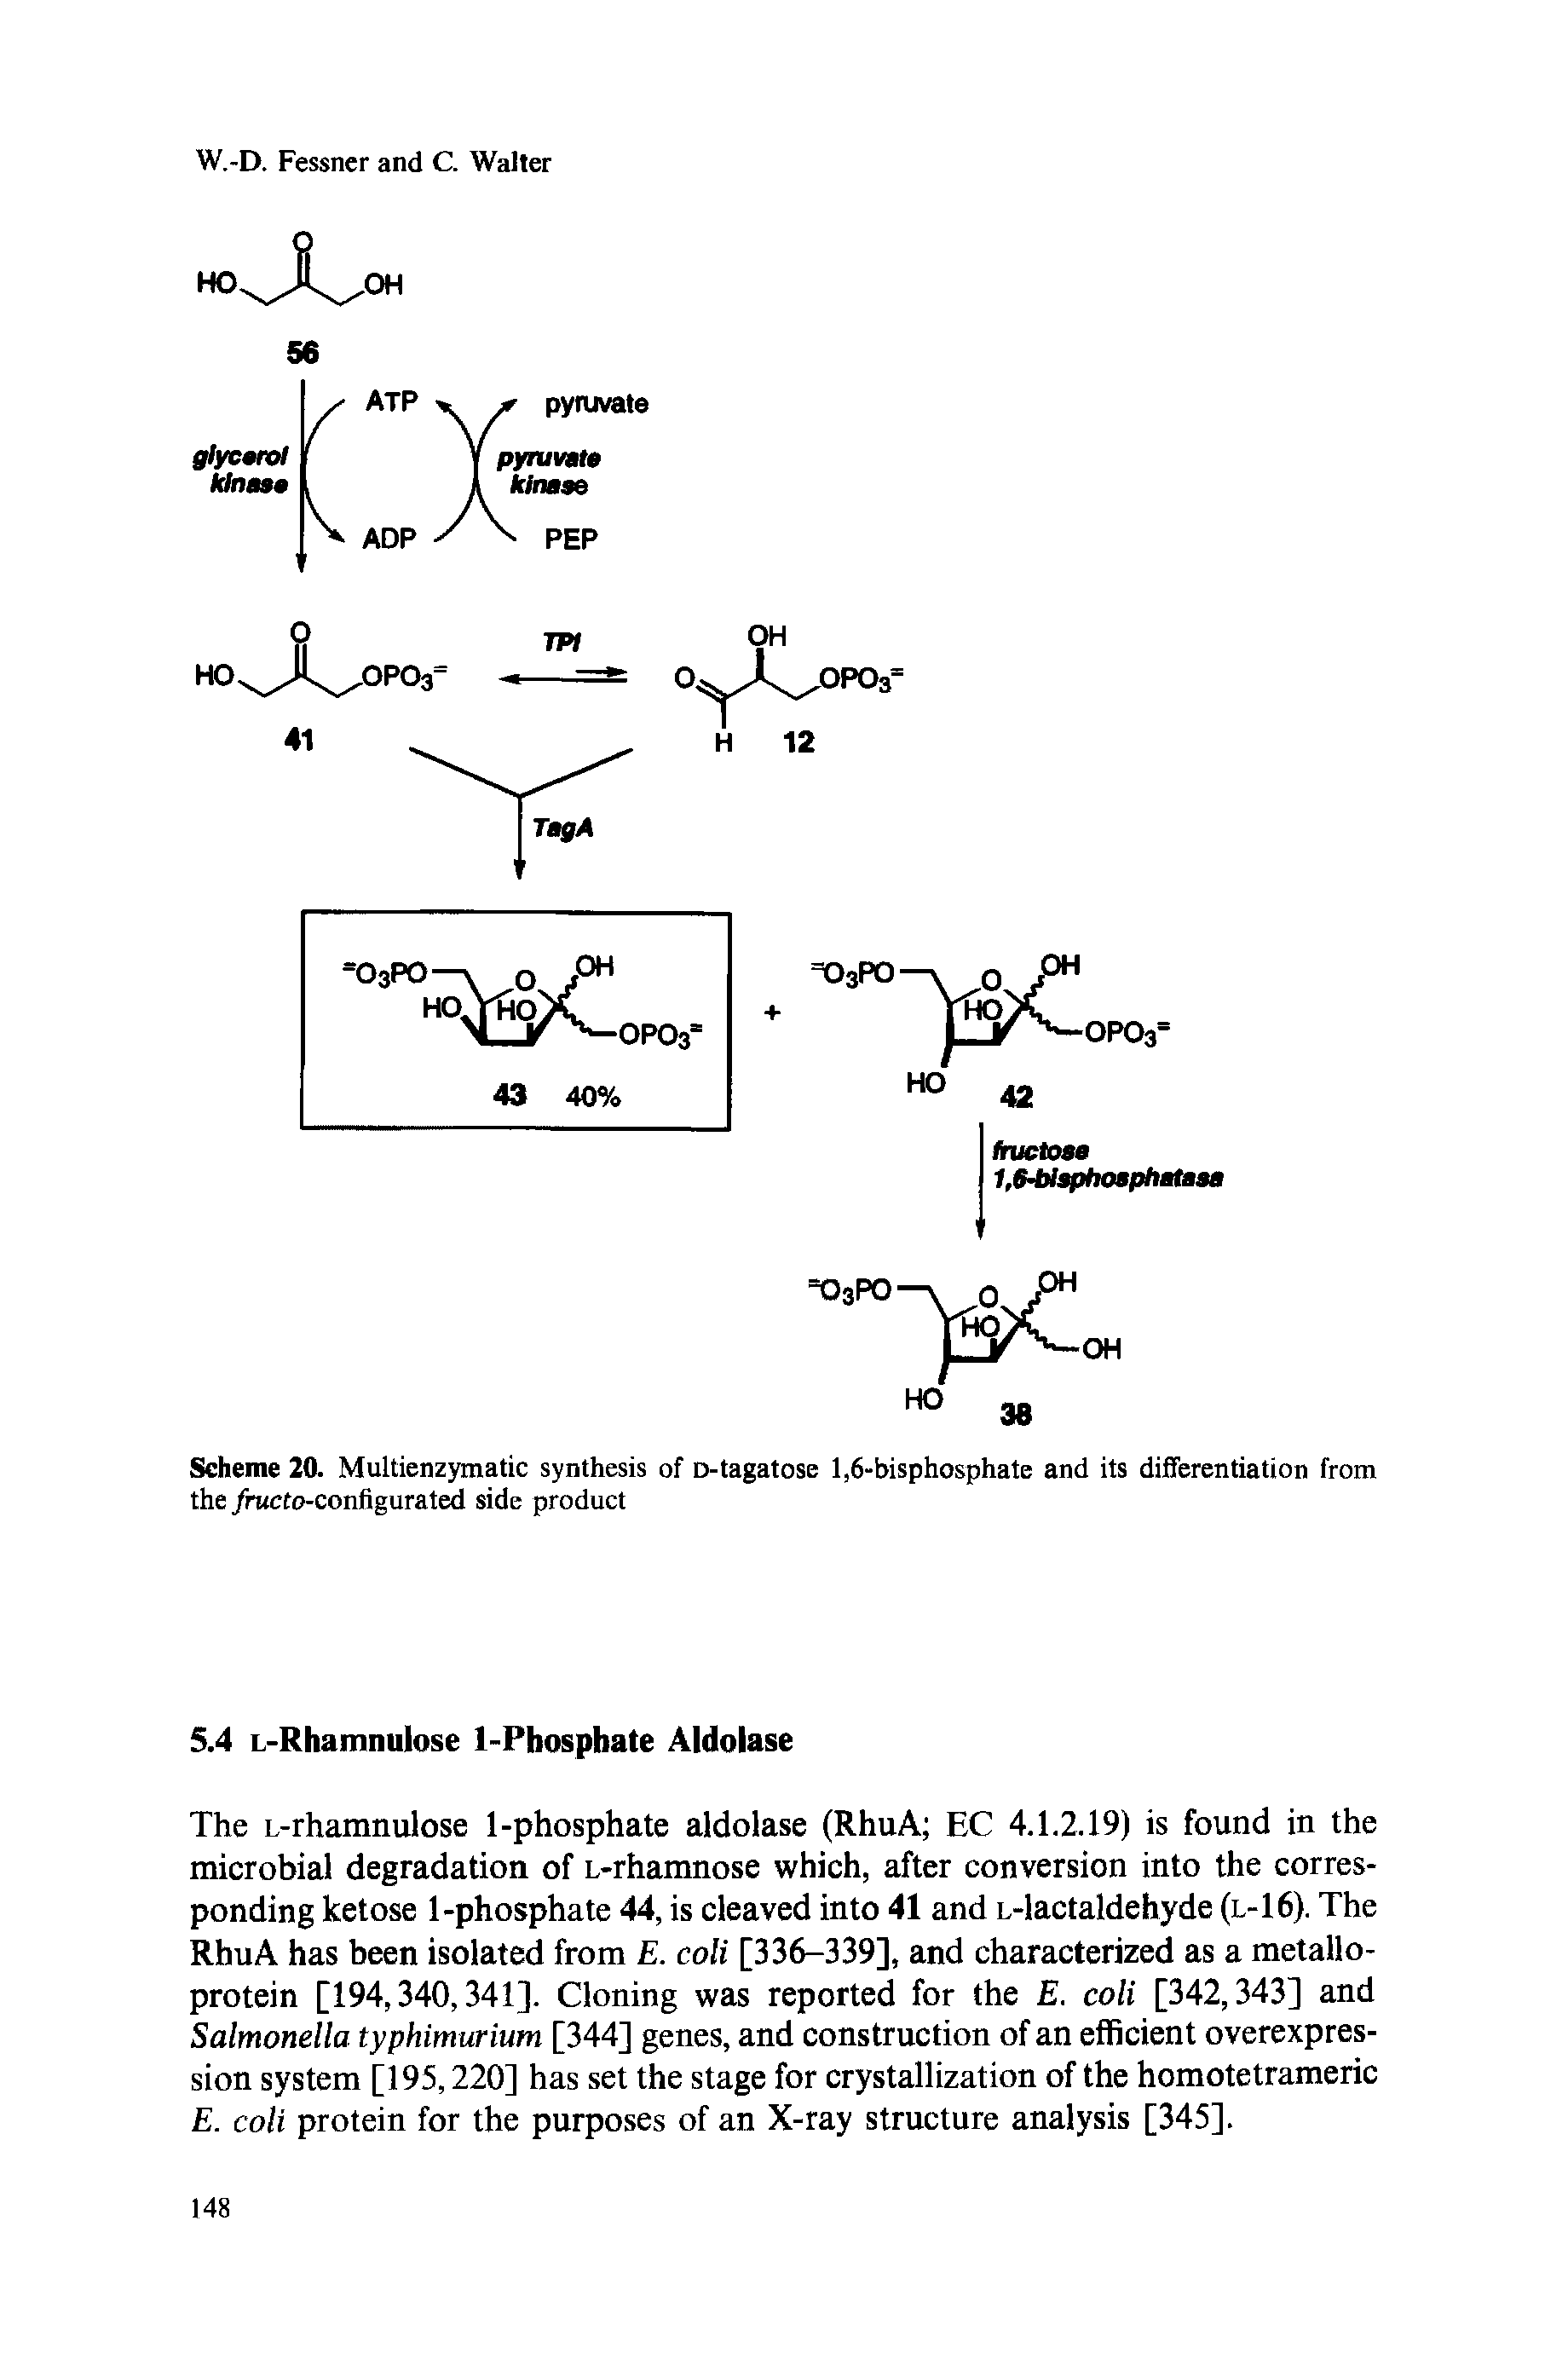 Scheme 20. Multienzymatic synthesis of D-tagatose 1,6-bisphosphate and its differentiation from the /rucfo-configurated side product...